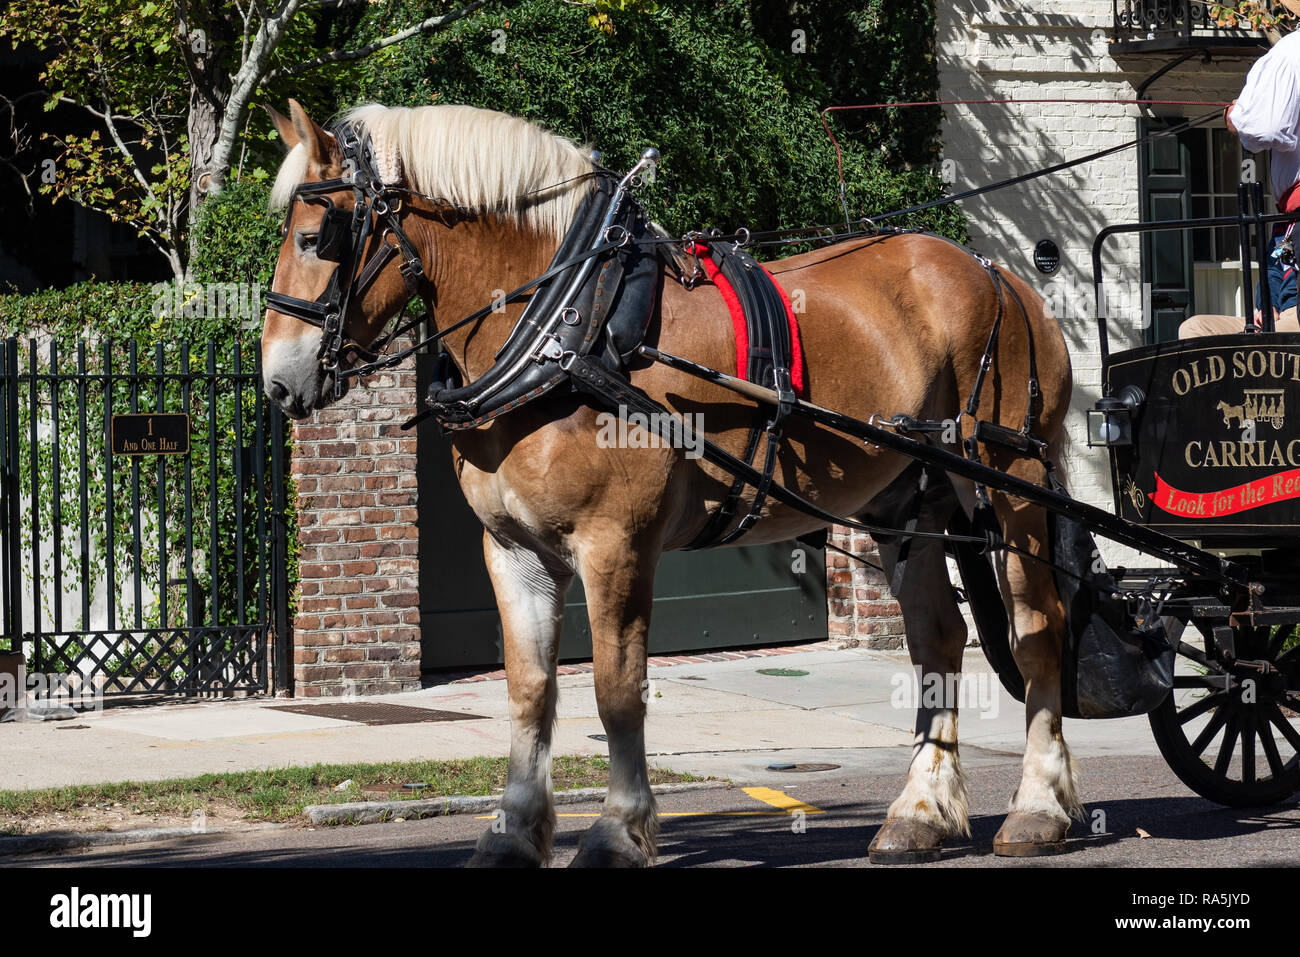 Horse and carriage Stock Photo